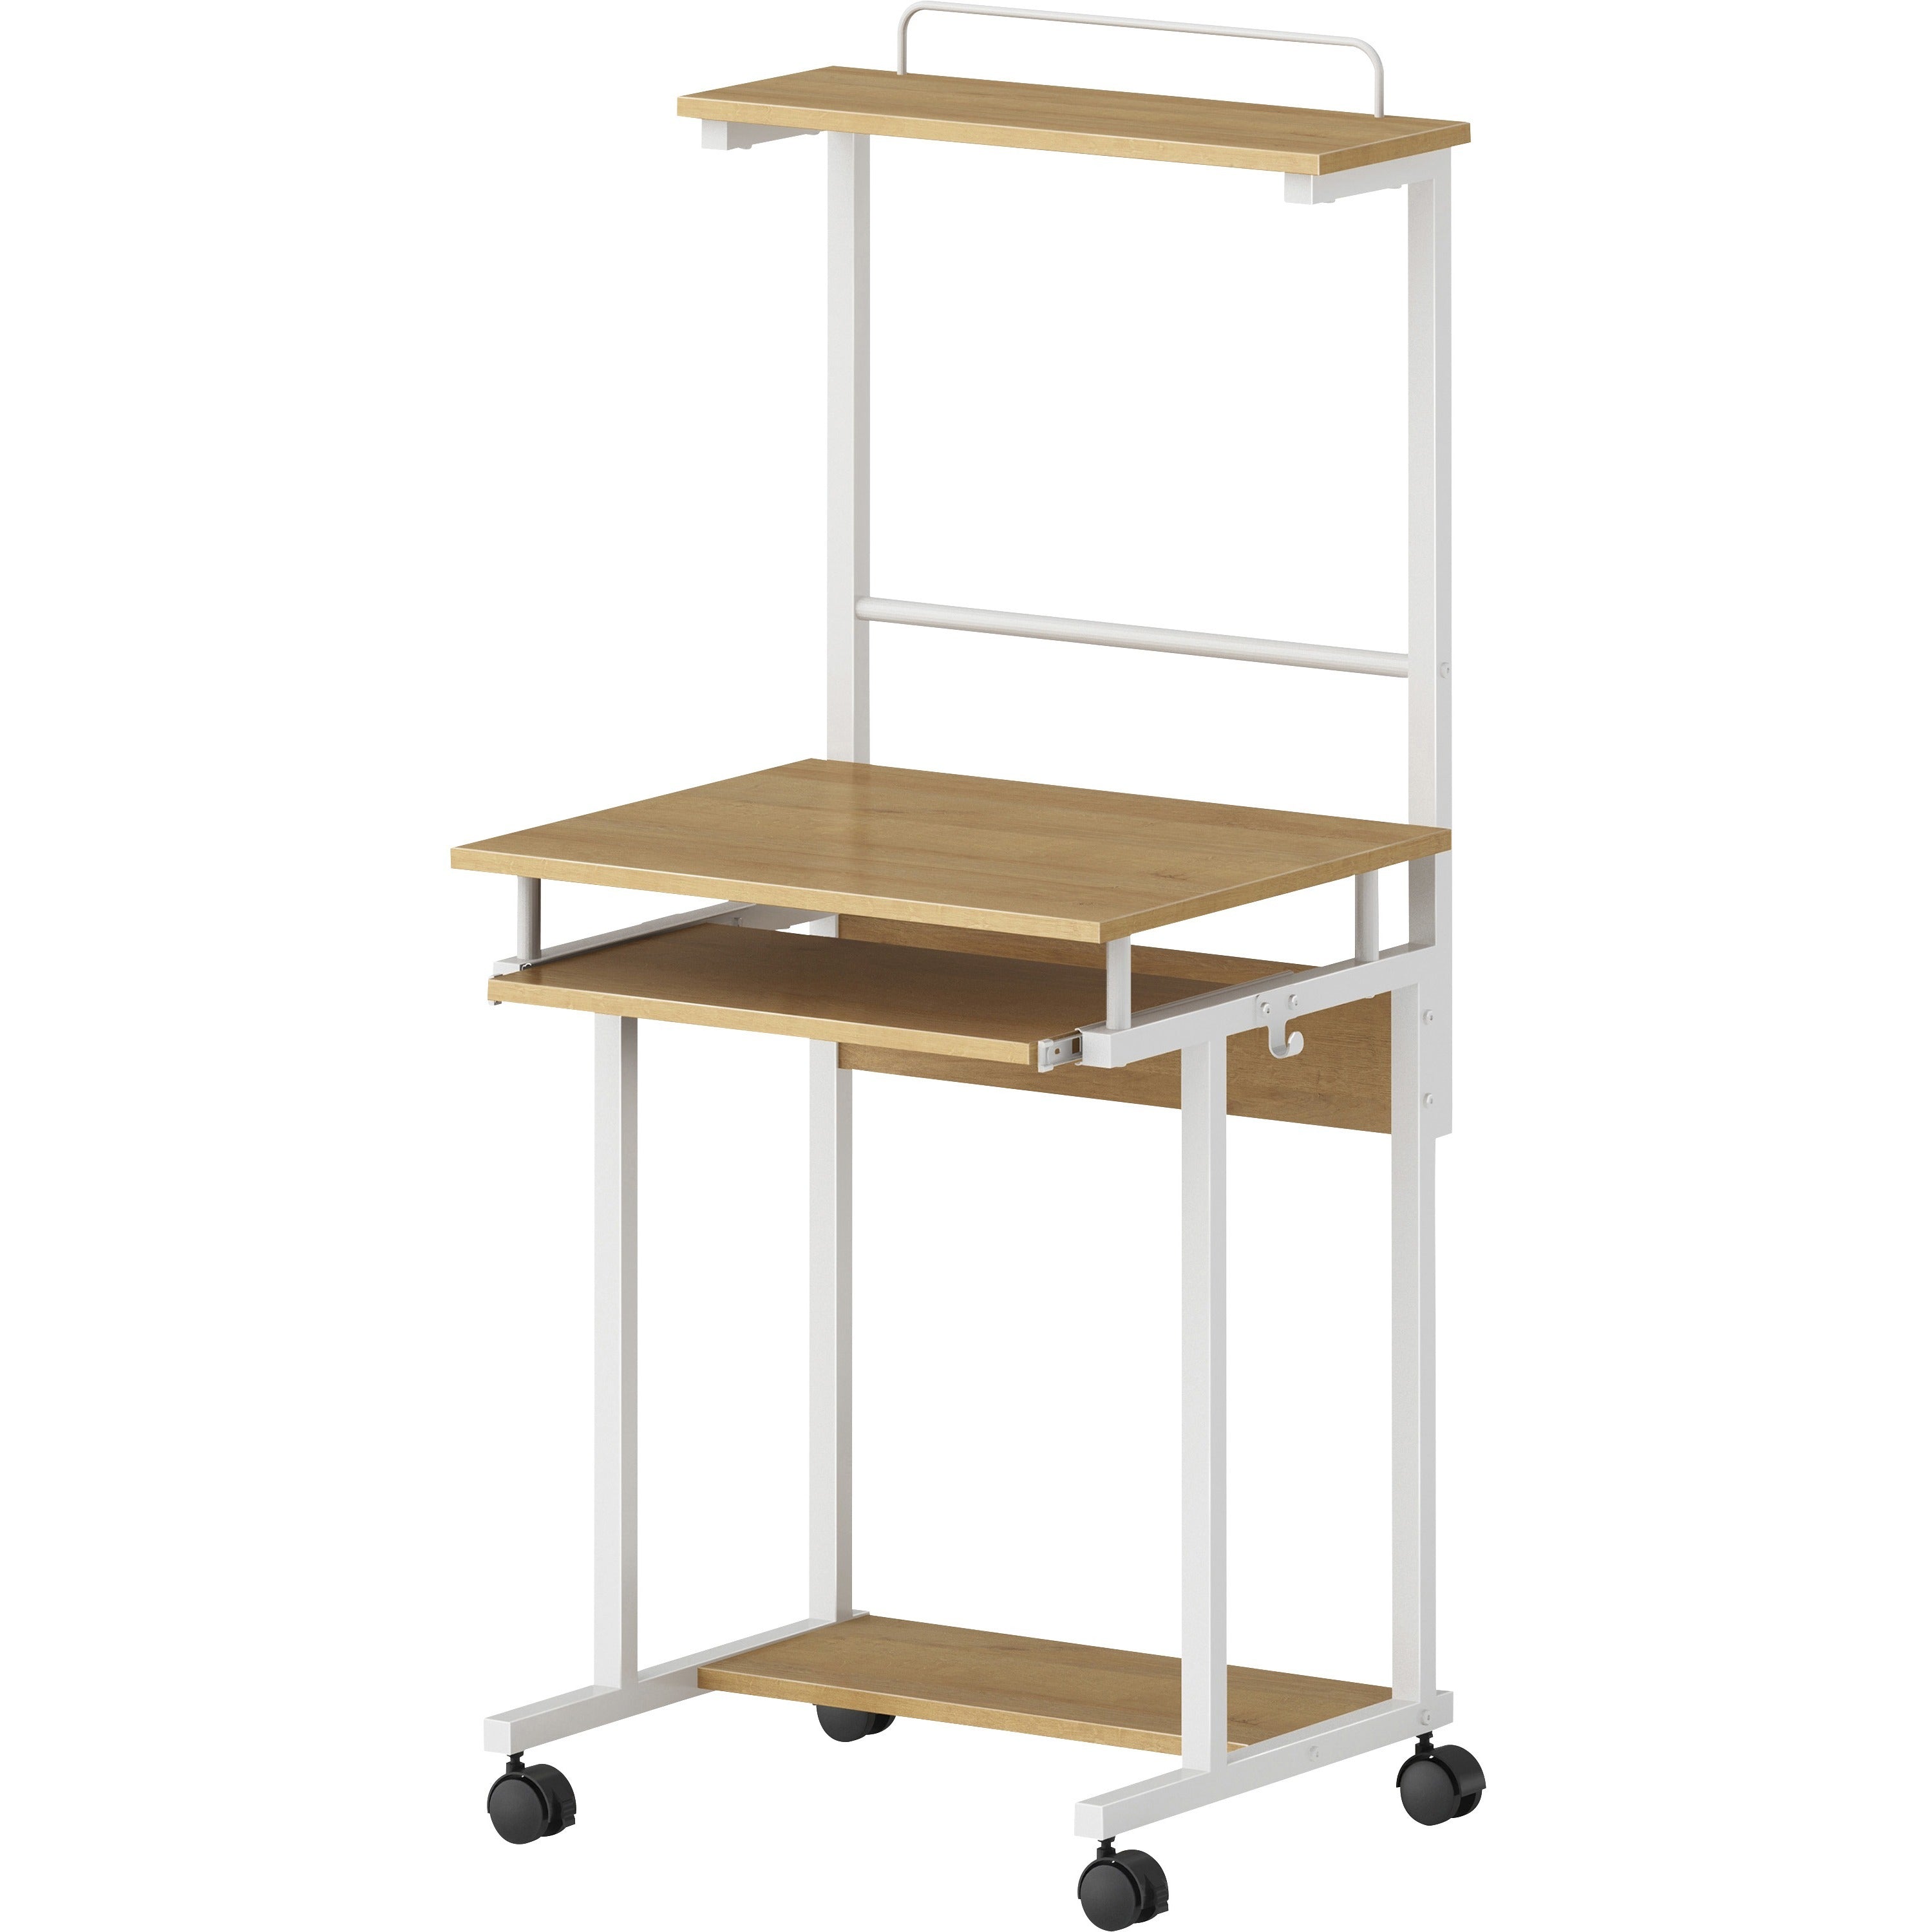 NuSparc Mobile Computer Workstation w/Keybrd Tray - For - Table TopMaple, White Top - 110 lb Capacity x 23.60" Table Top Width x 20.60" Table Top Depth - 53.50" Height - Assembly Required - Medium Density Fiberboard (MDF) Top Material - 1 Each - 4